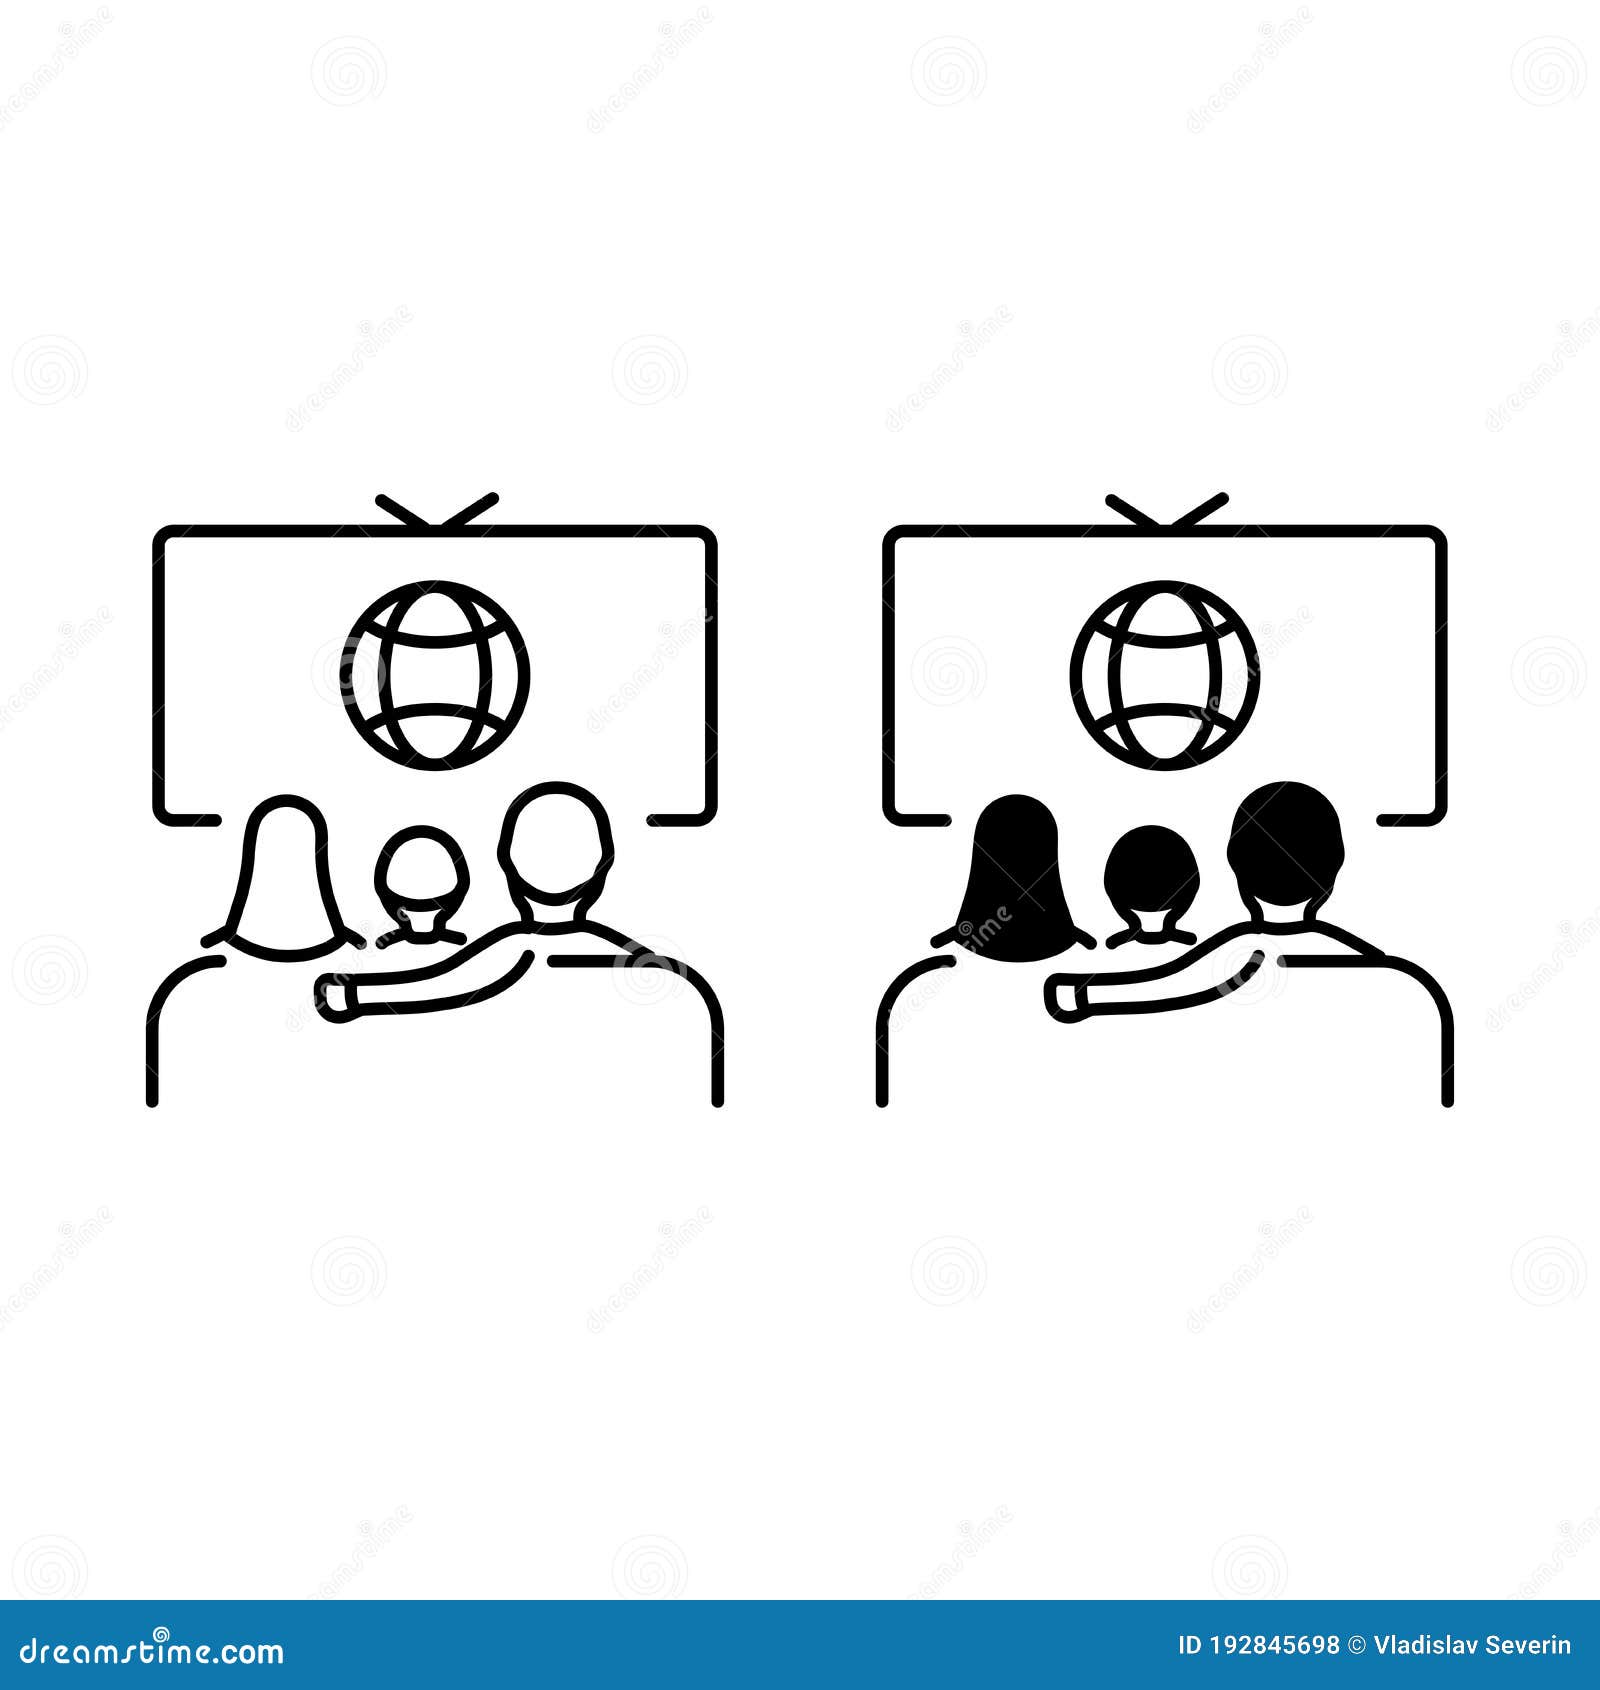 419 Family Watching Tv Drawing Images Stock Photos  Vectors  Shutterstock